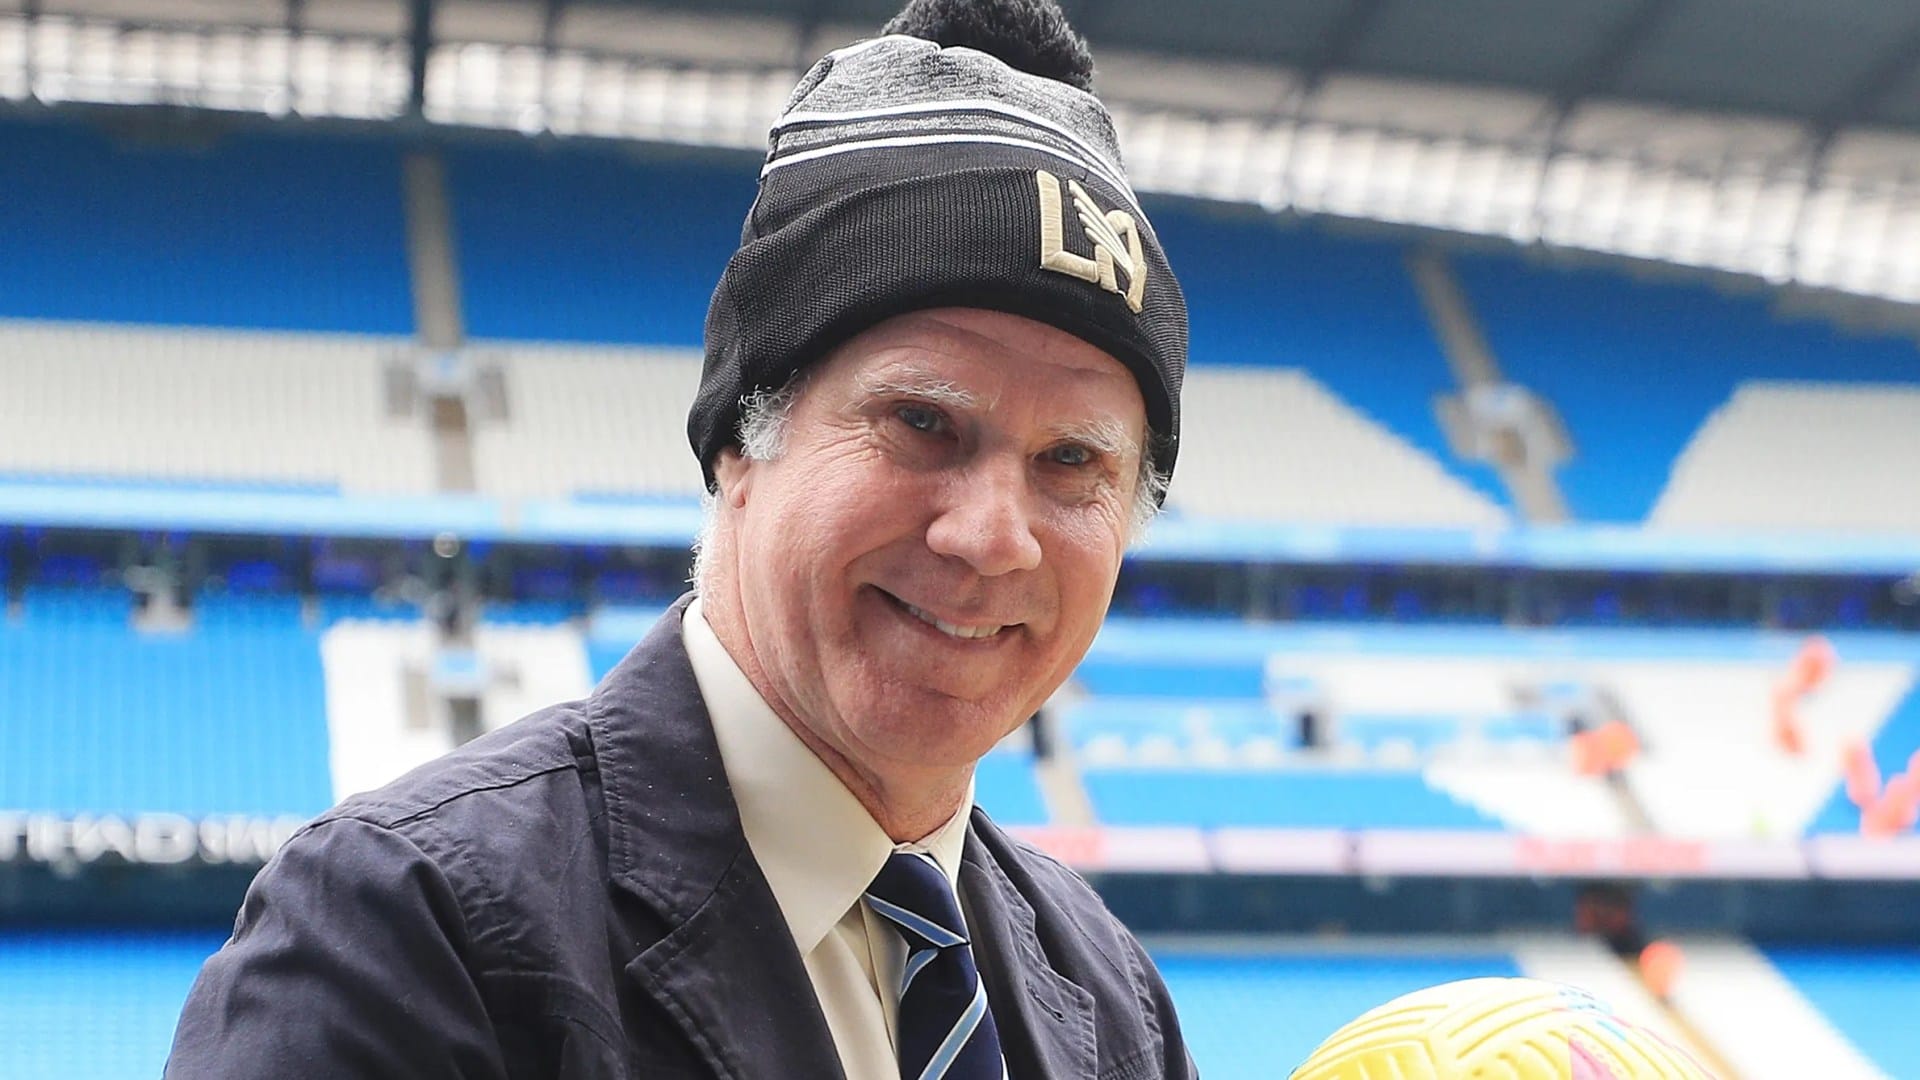 Hollywood's Will Ferrell buys 'large stake' in 'sleeping giant' Leeds United after falling in love with English football